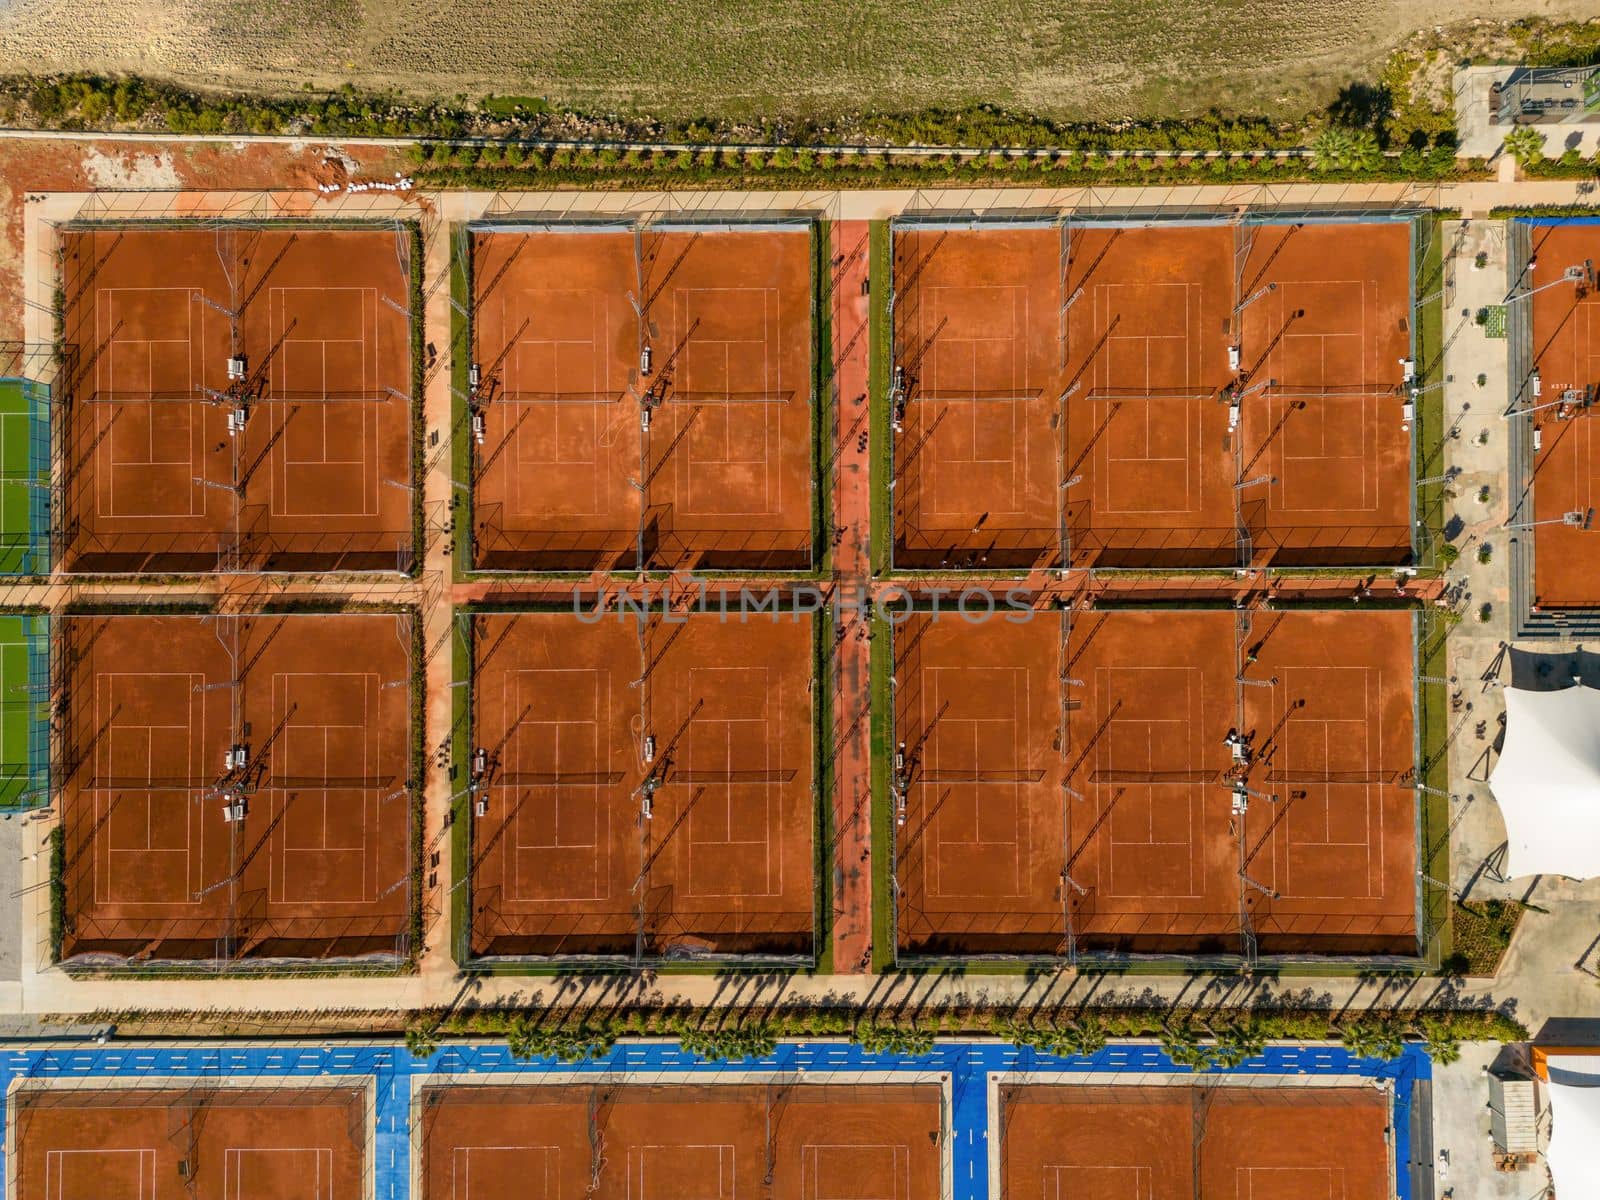 Aerial view of empty clay tennis court on a sunny day by Sonat